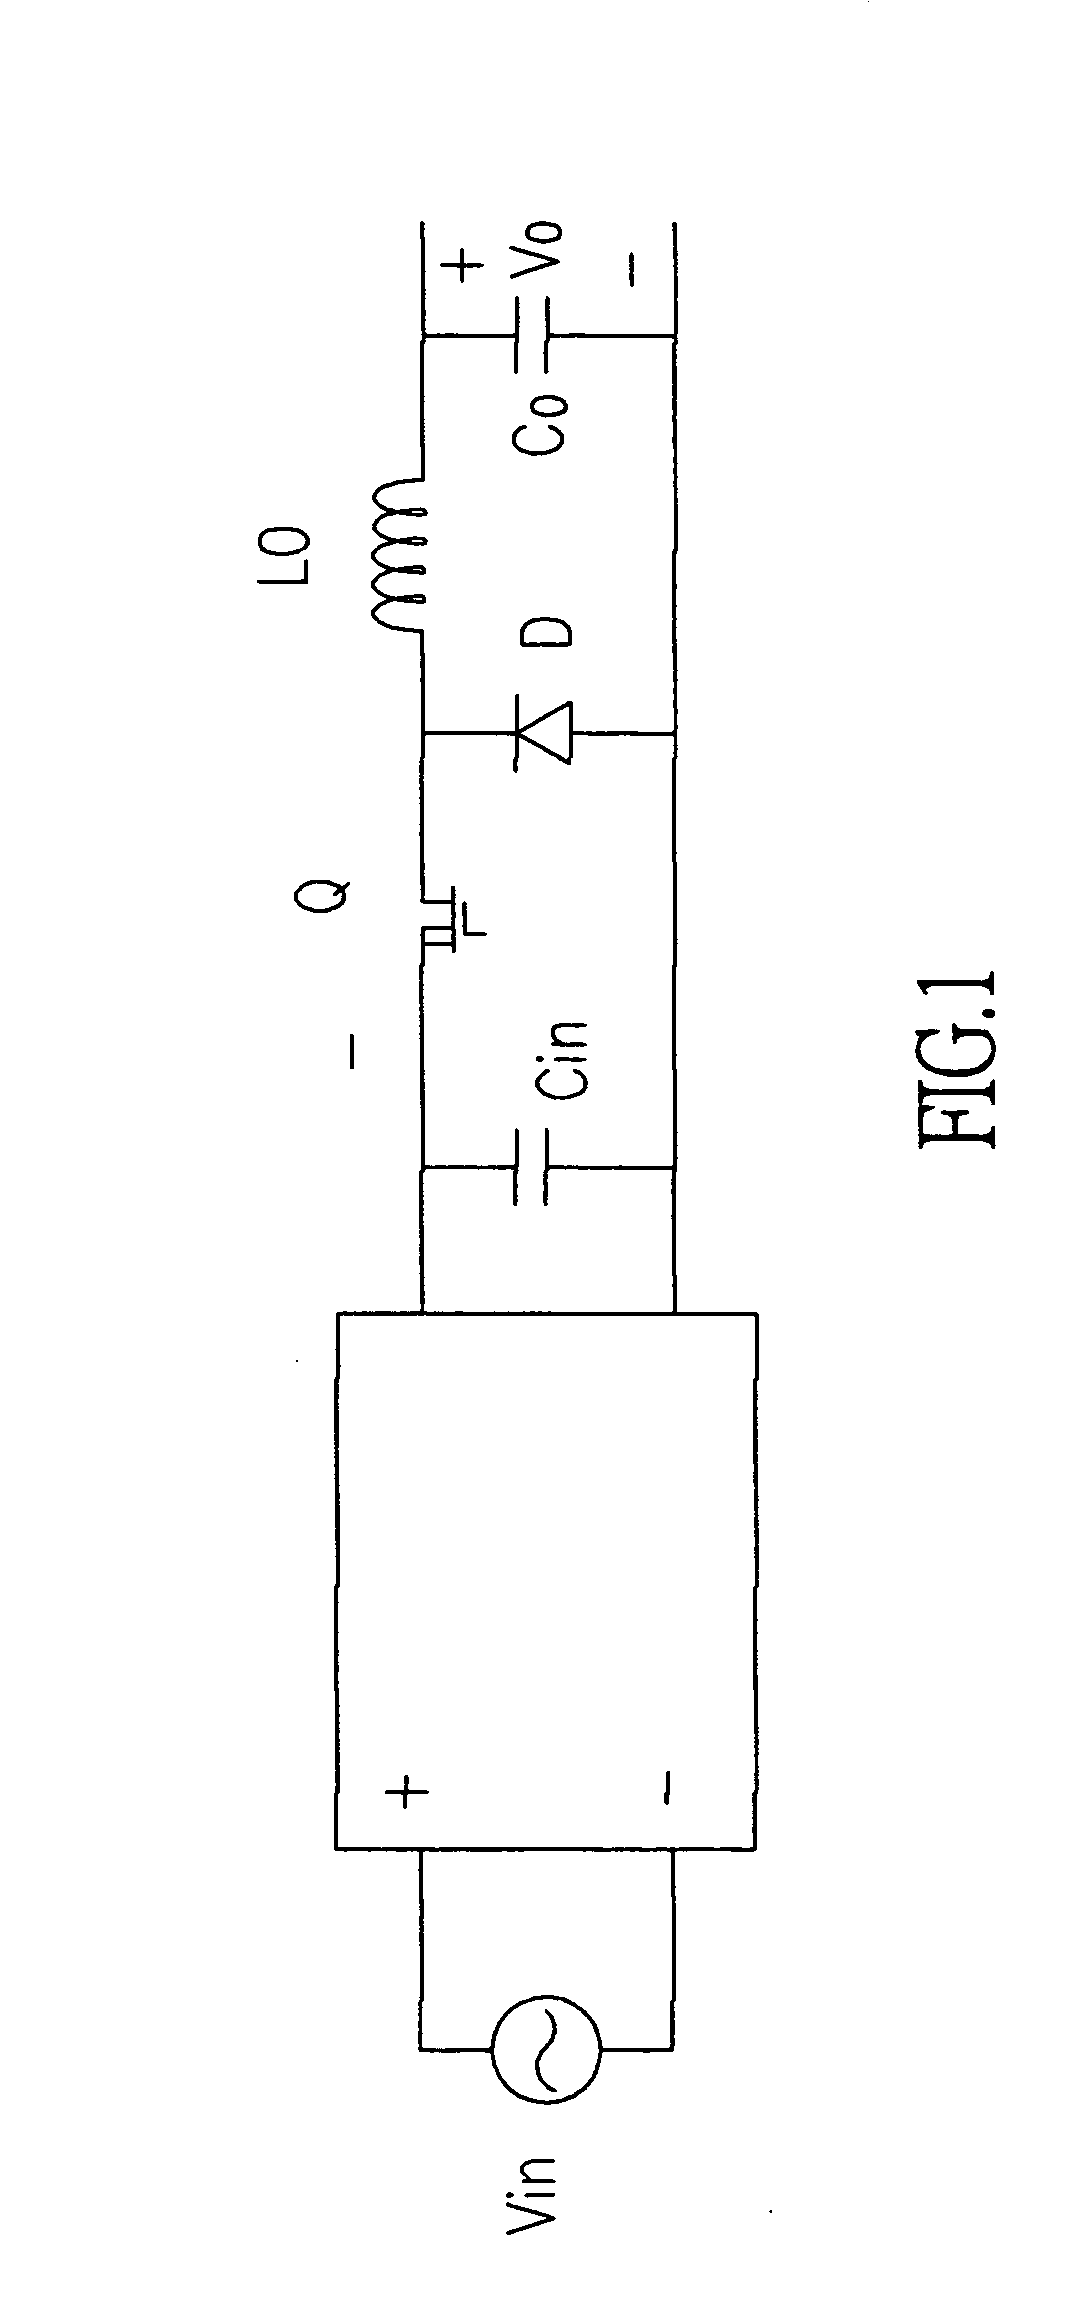 Power supply device for out putting stable programmable power supply